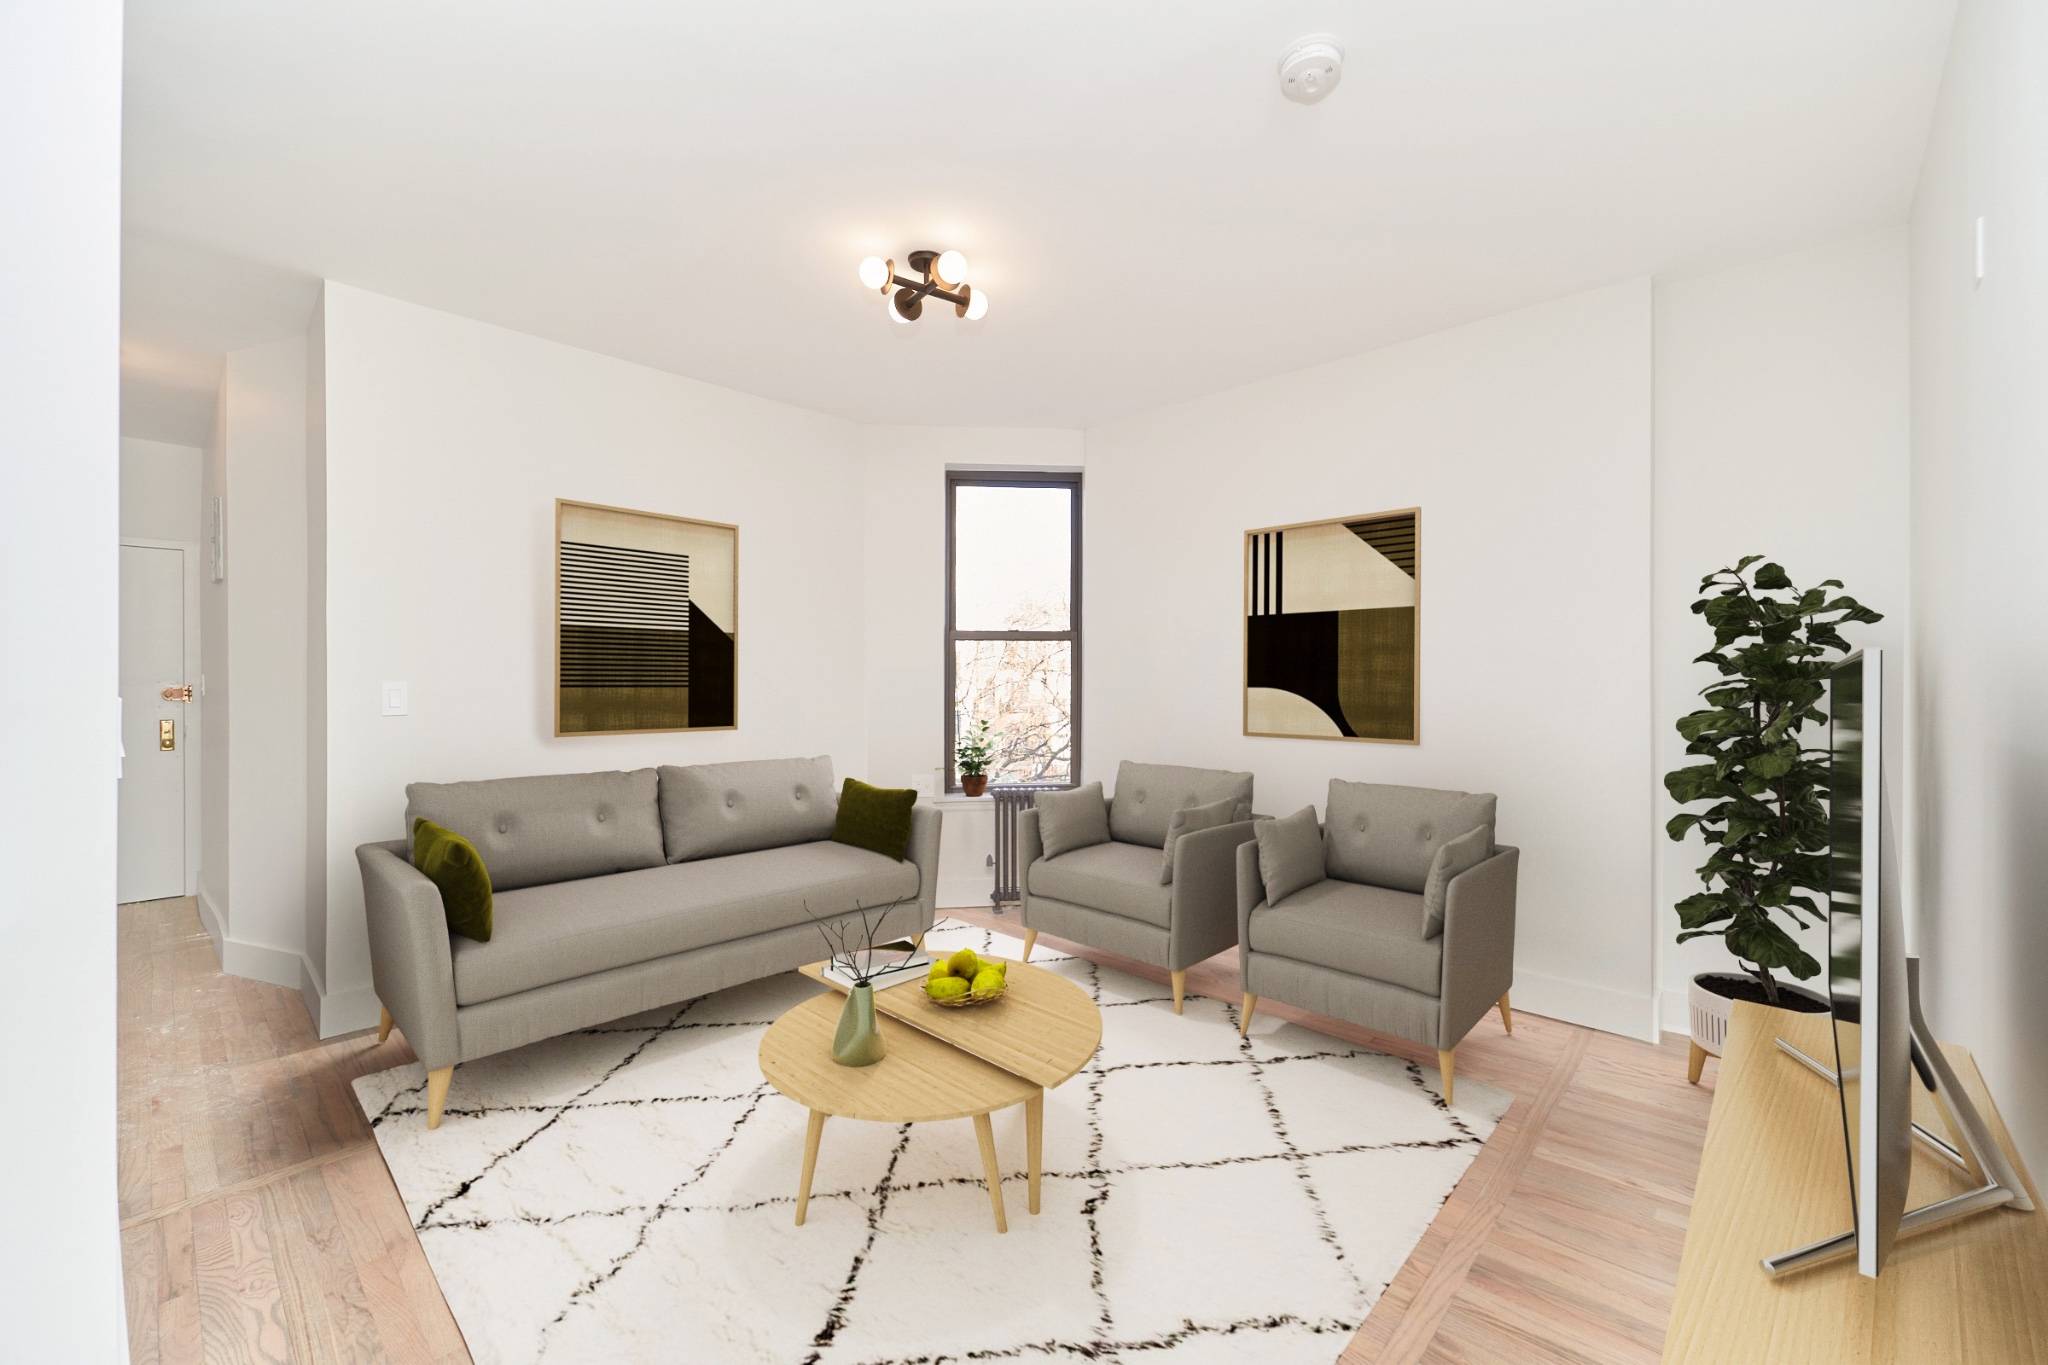 306 East 5th Street is a luxury walkup building located in the heart of The East VillageApartments Features Dishwasher Hardwood Floors Marble Counter tops Matte Black Appliances Light Wood cabinets ...